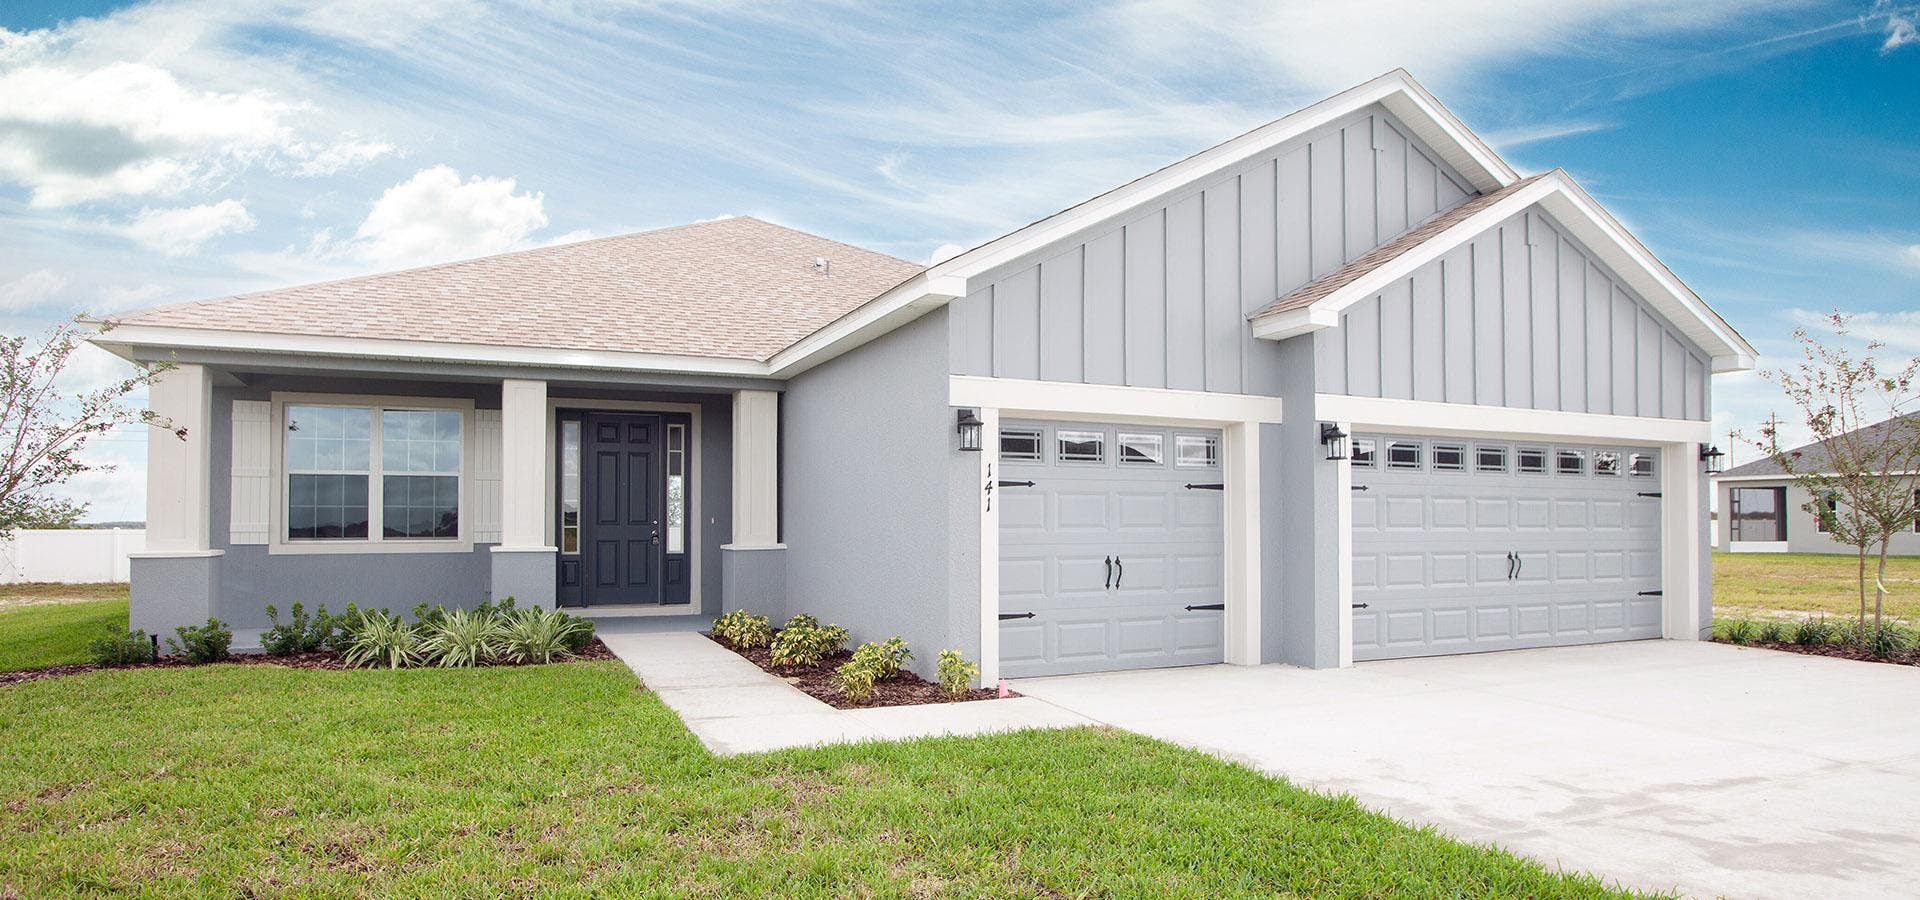 Exterior of new home in Auburndale FL